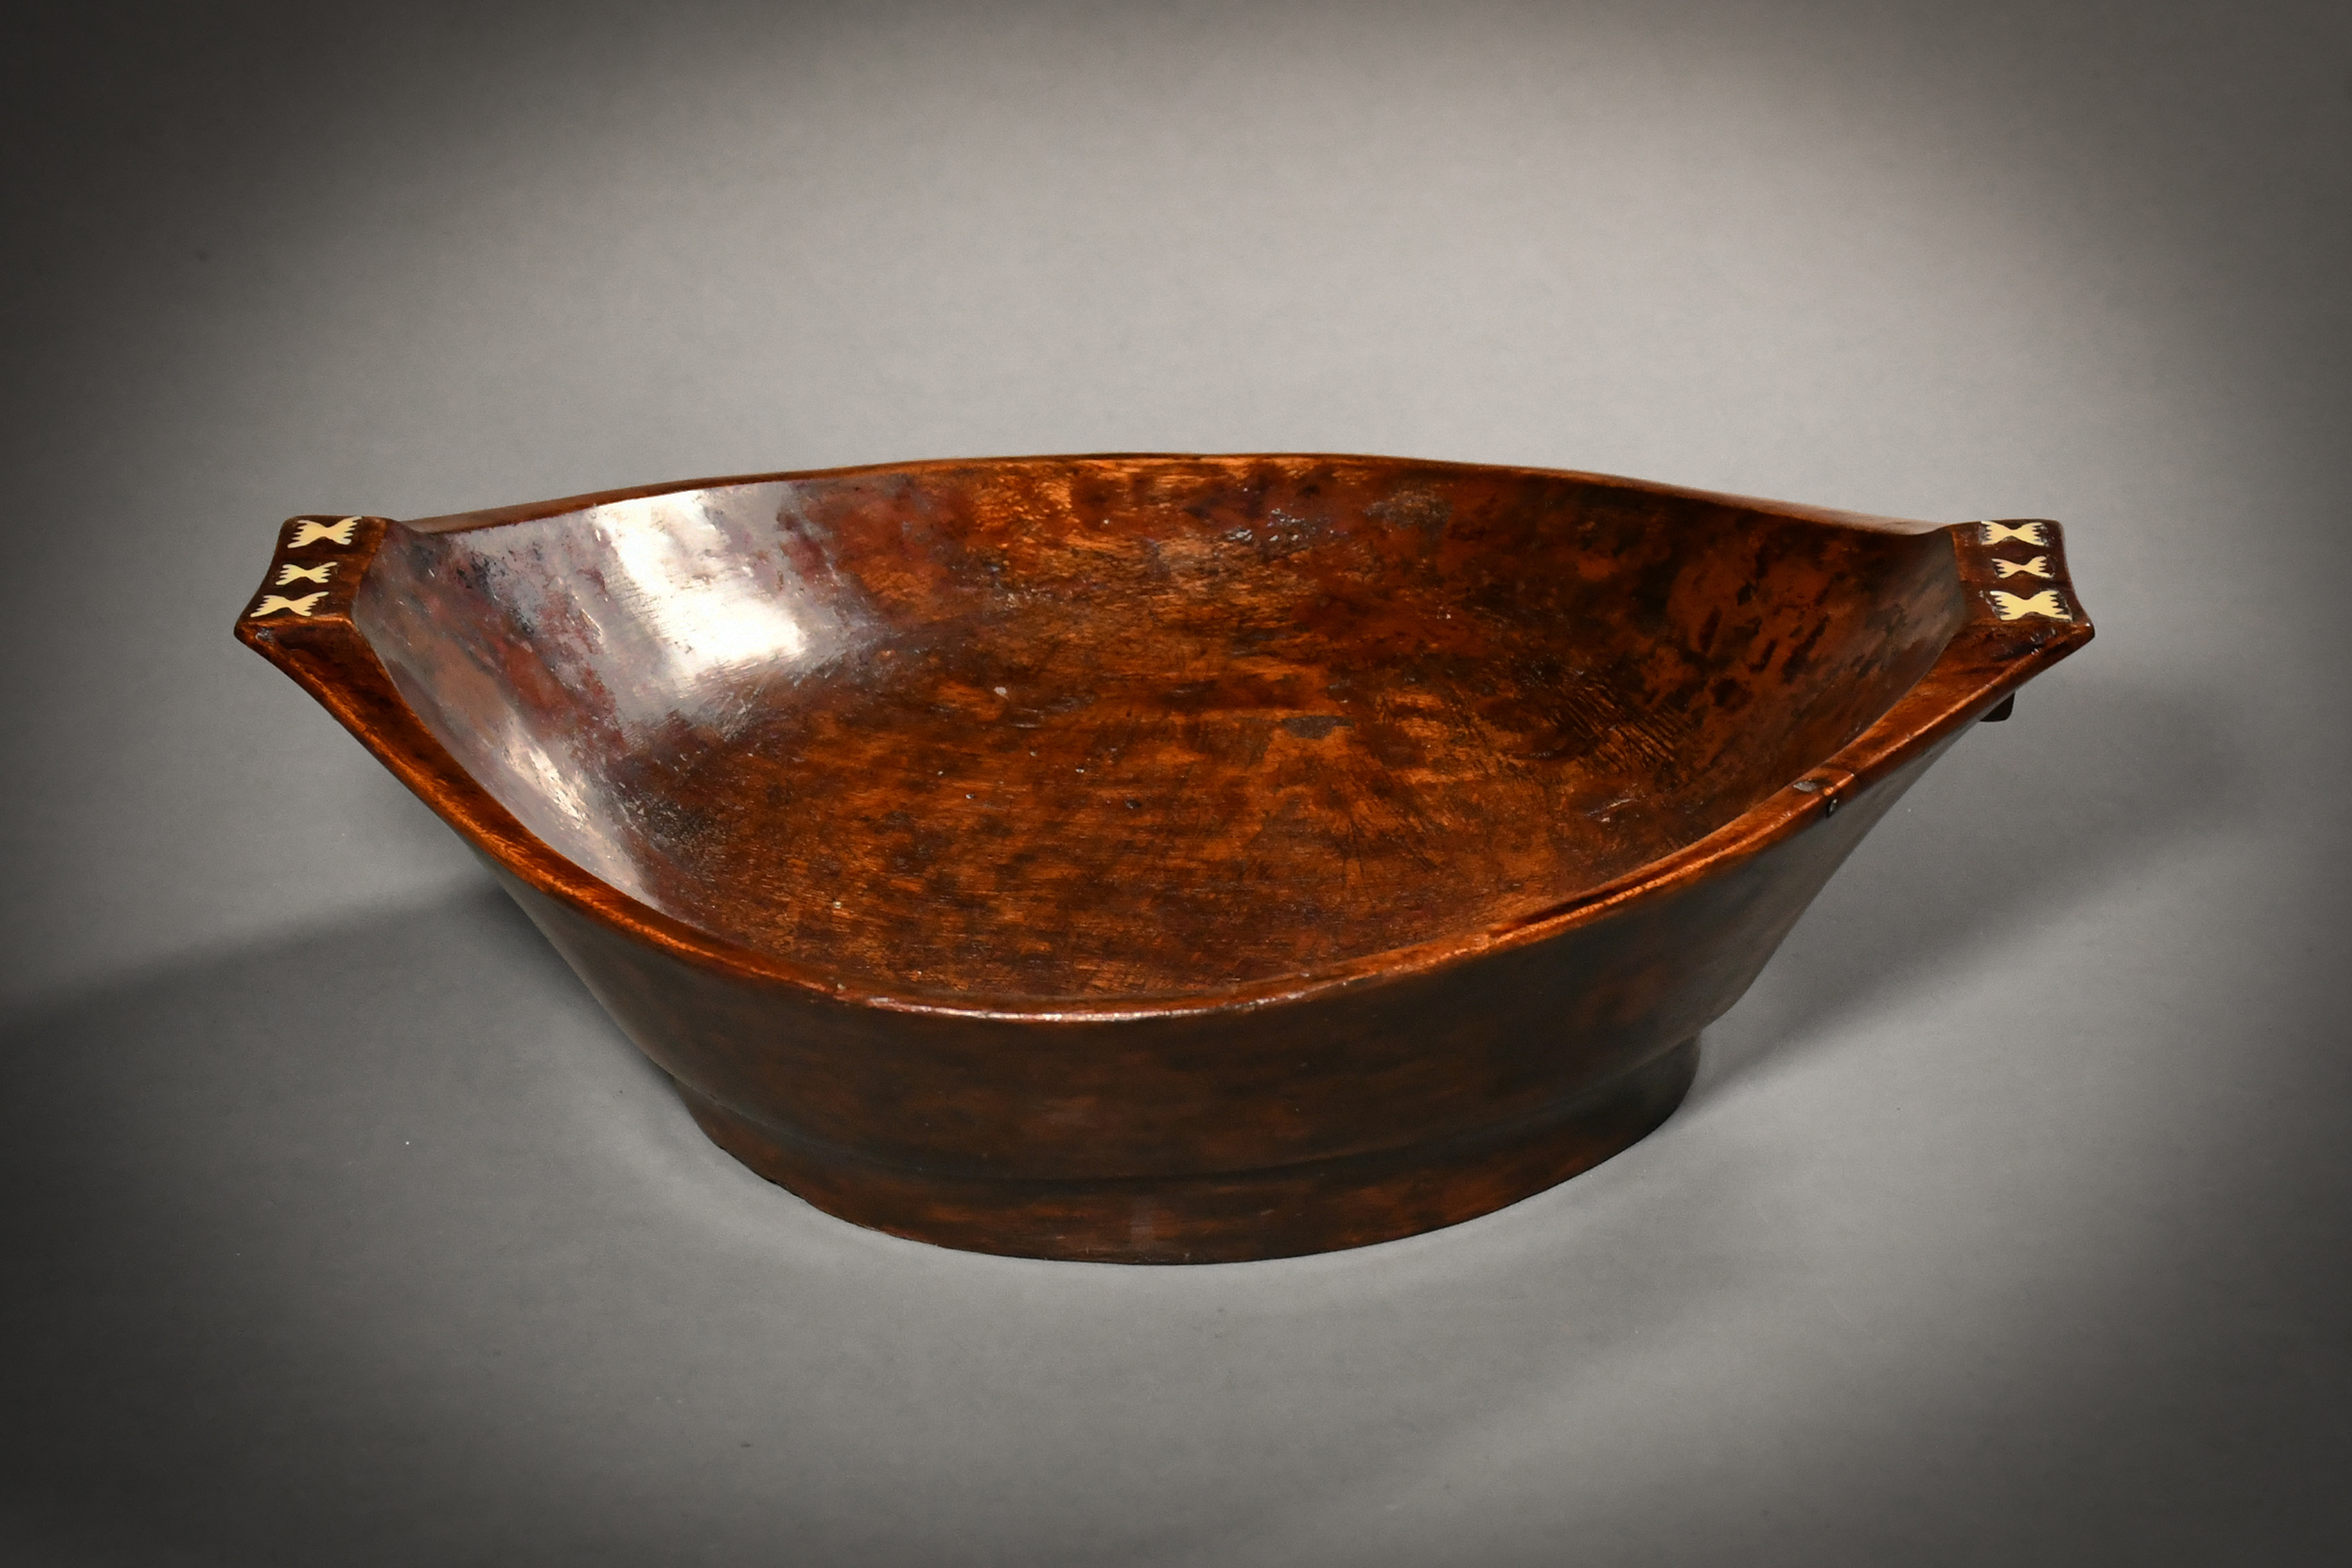 A fine old Ceremonial Food Bowl from Chukk Island Micronesia